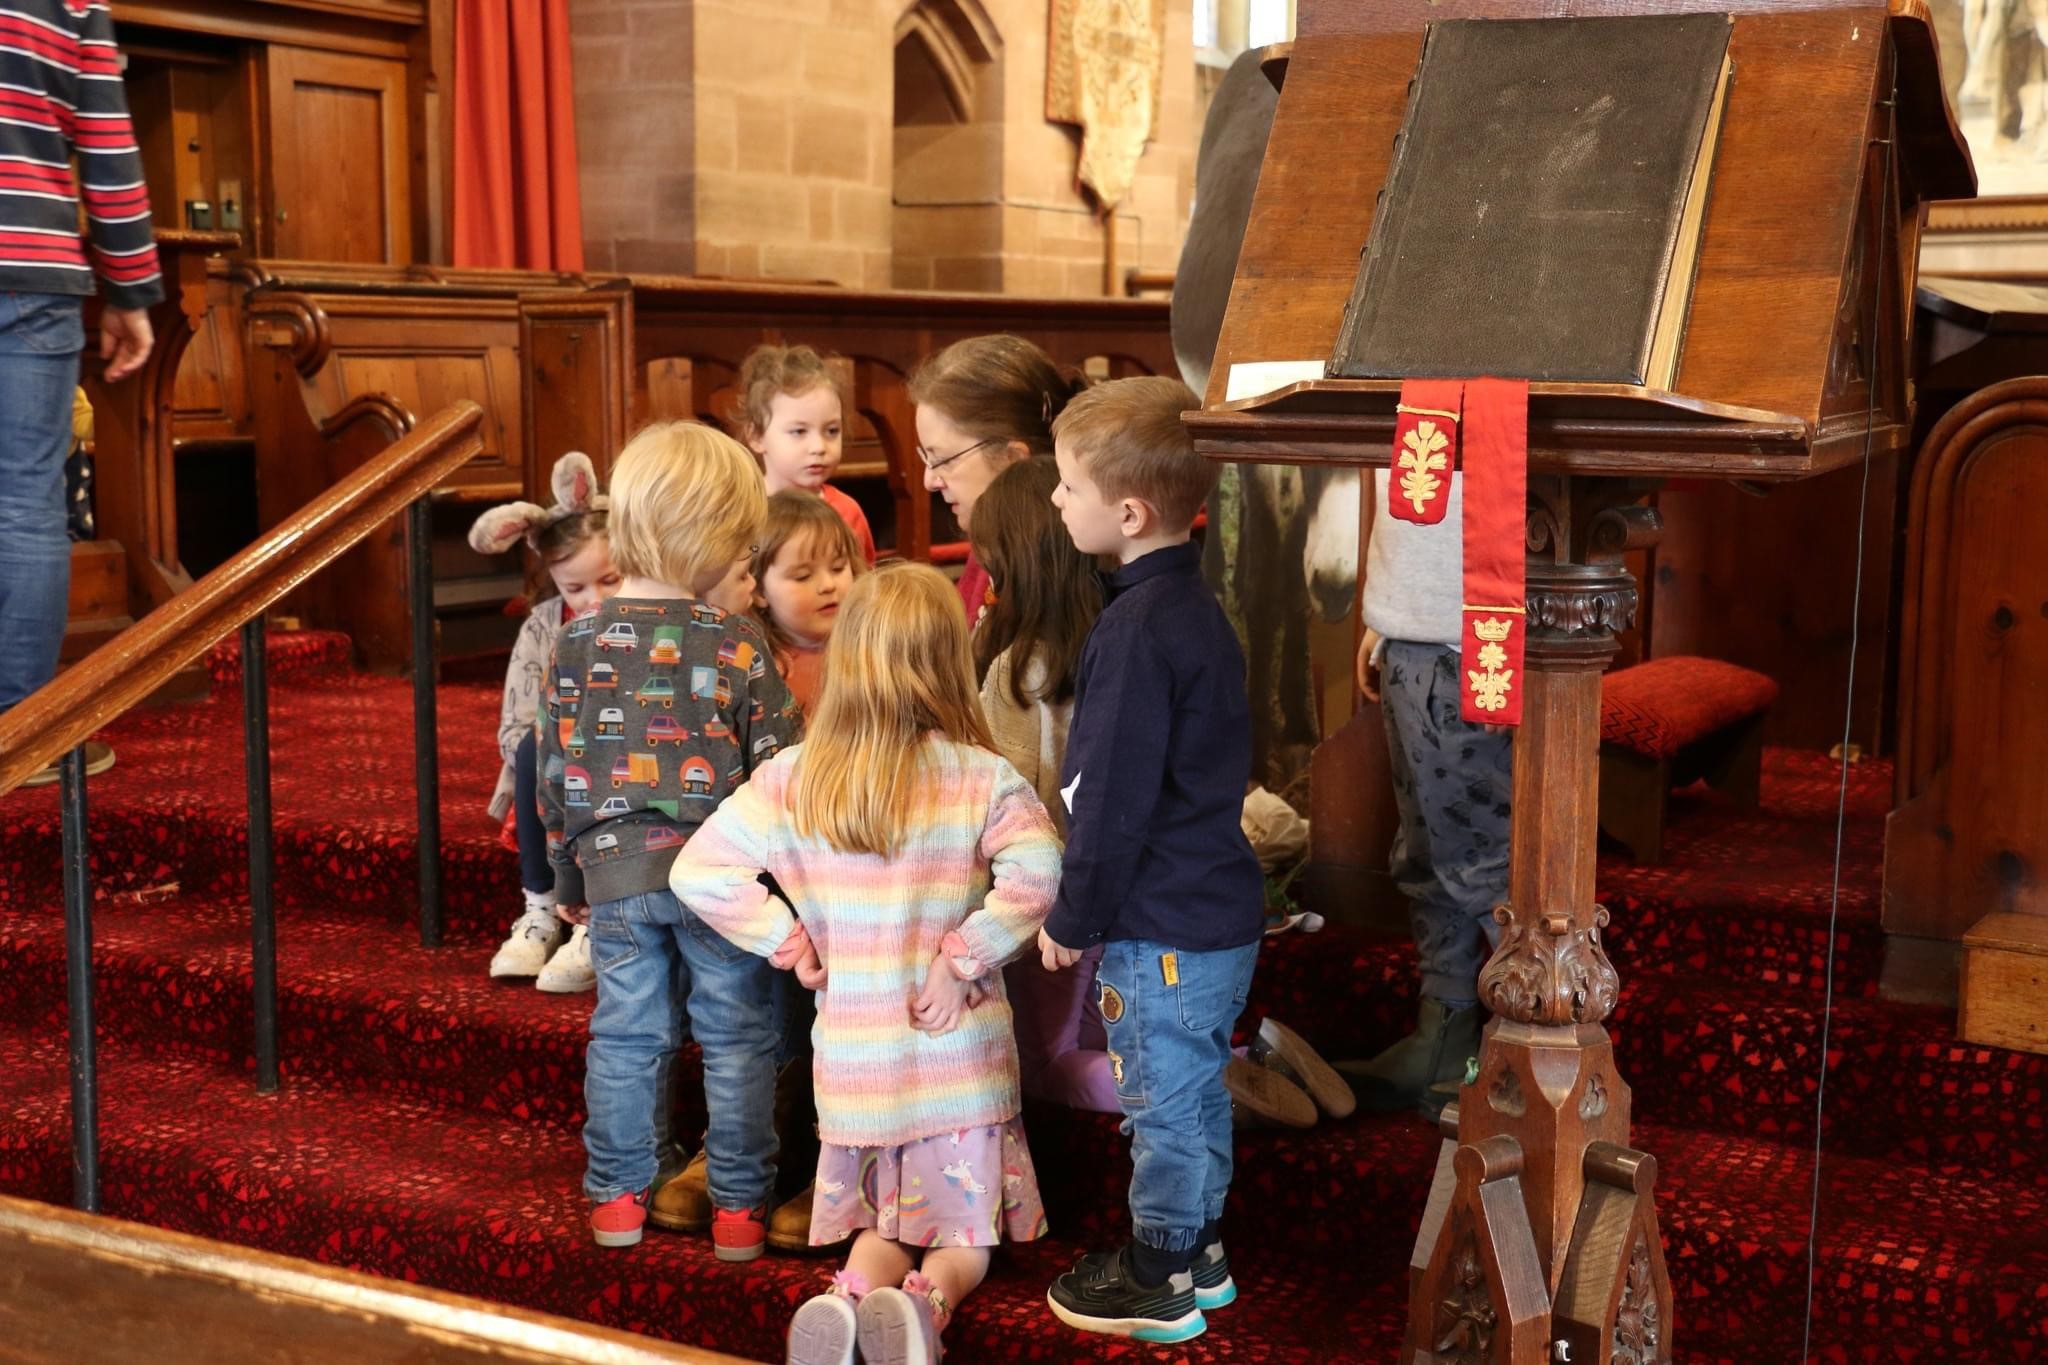 The children gather on the steps to hear a story